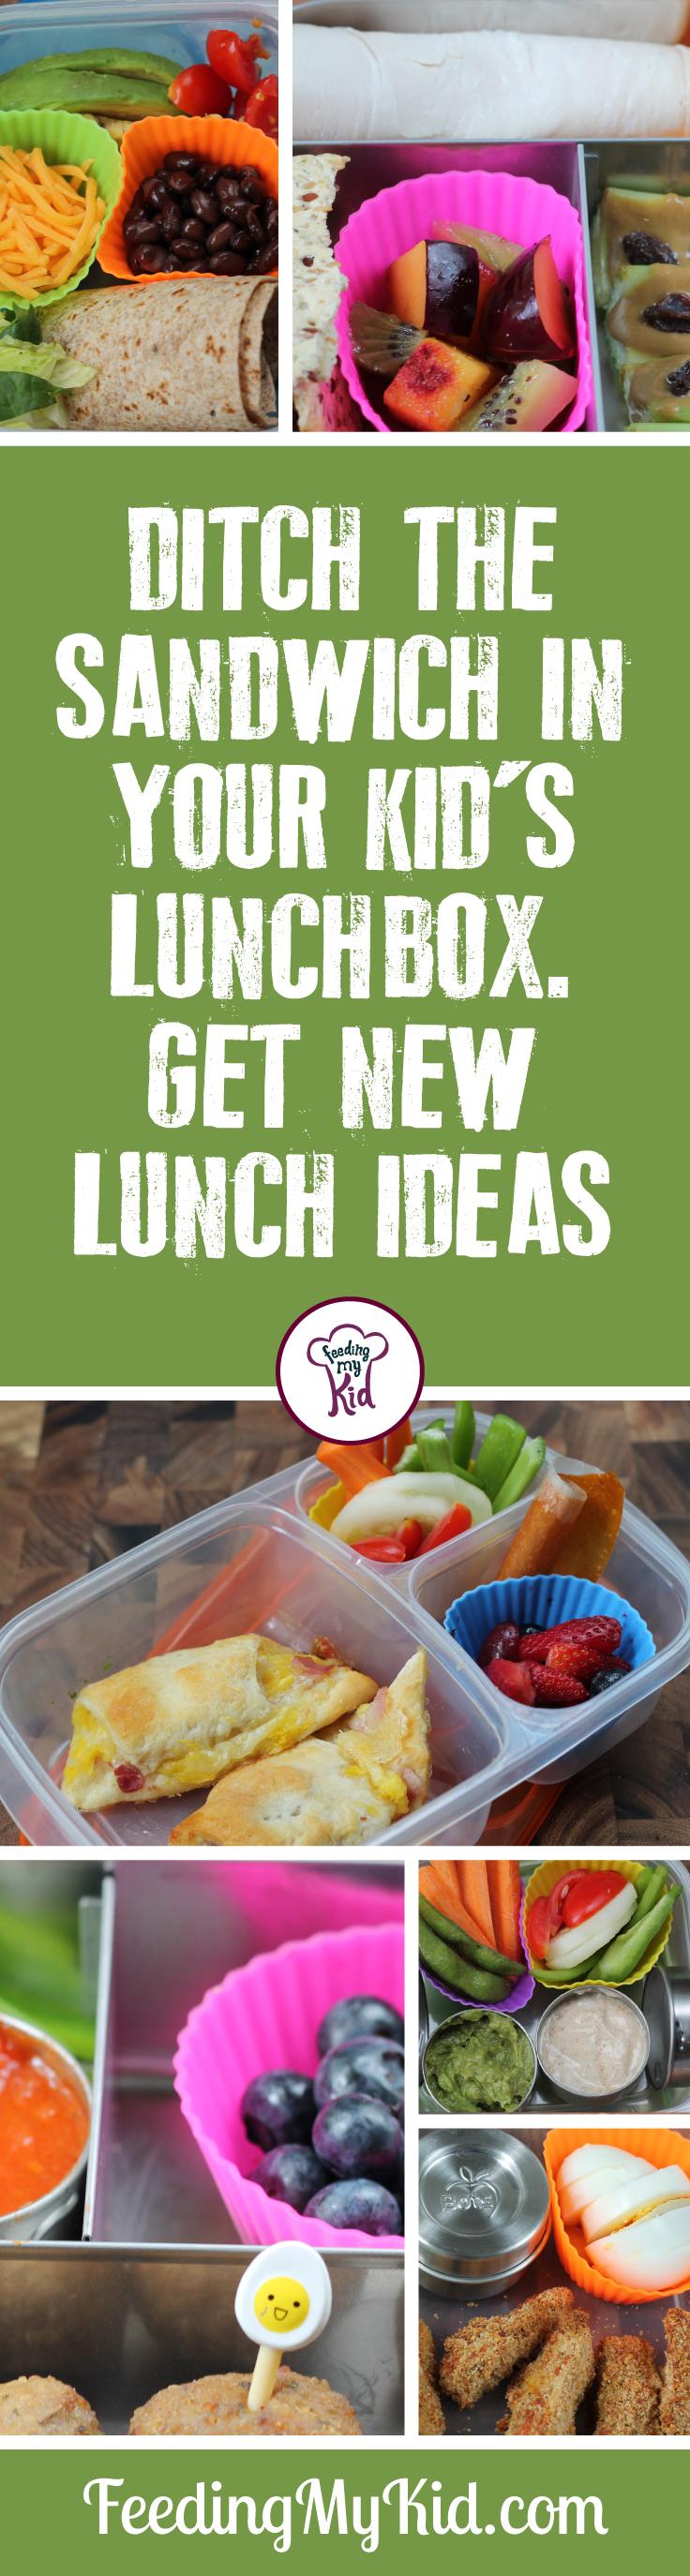 Get new lunch ideas for your kid; ditch the sandwich. Get inspired with these great lunch tips and tricks. No more boring sandwiches every day.